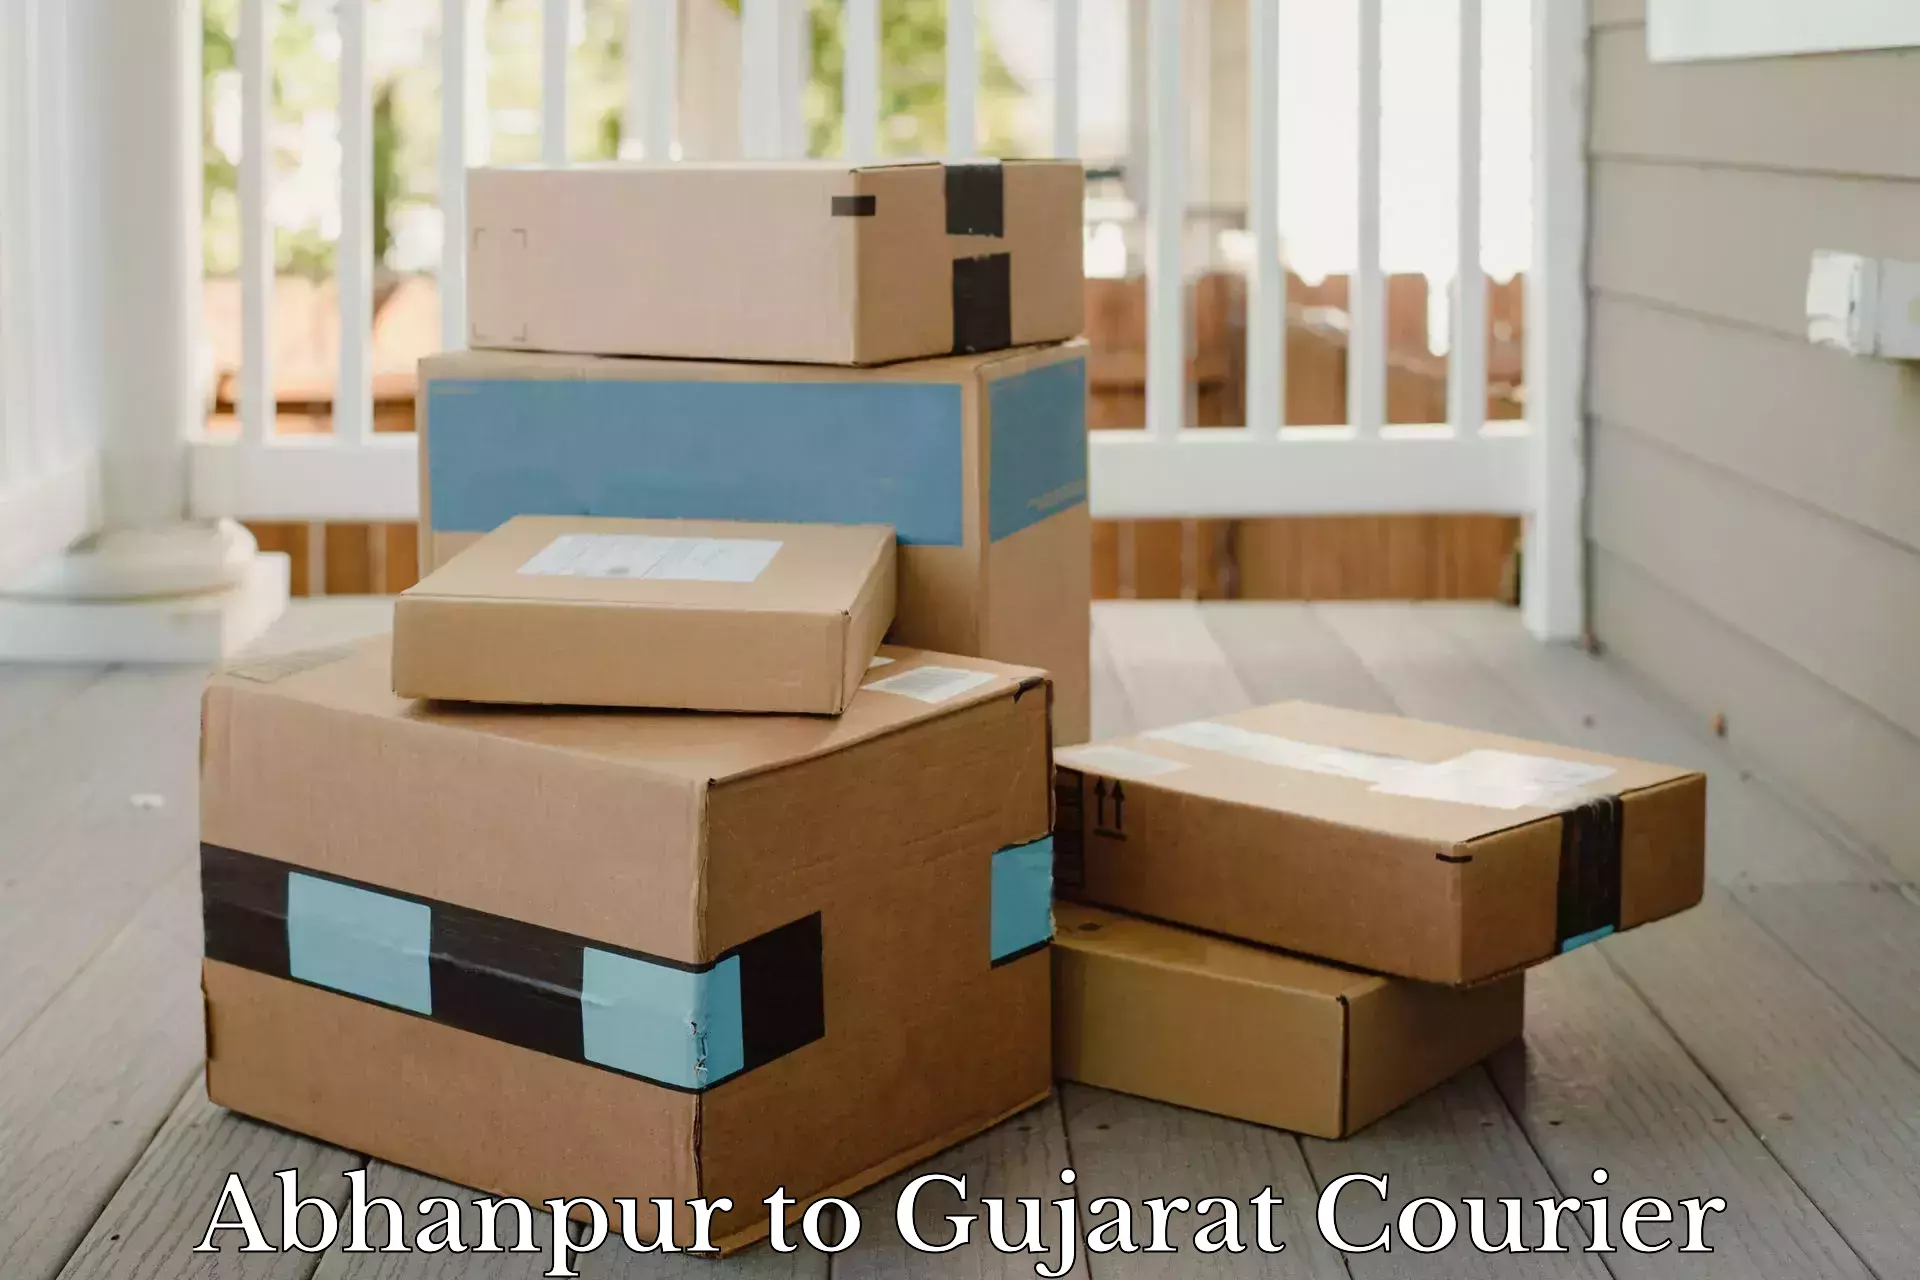 Parcel service for businesses Abhanpur to Nasvadi